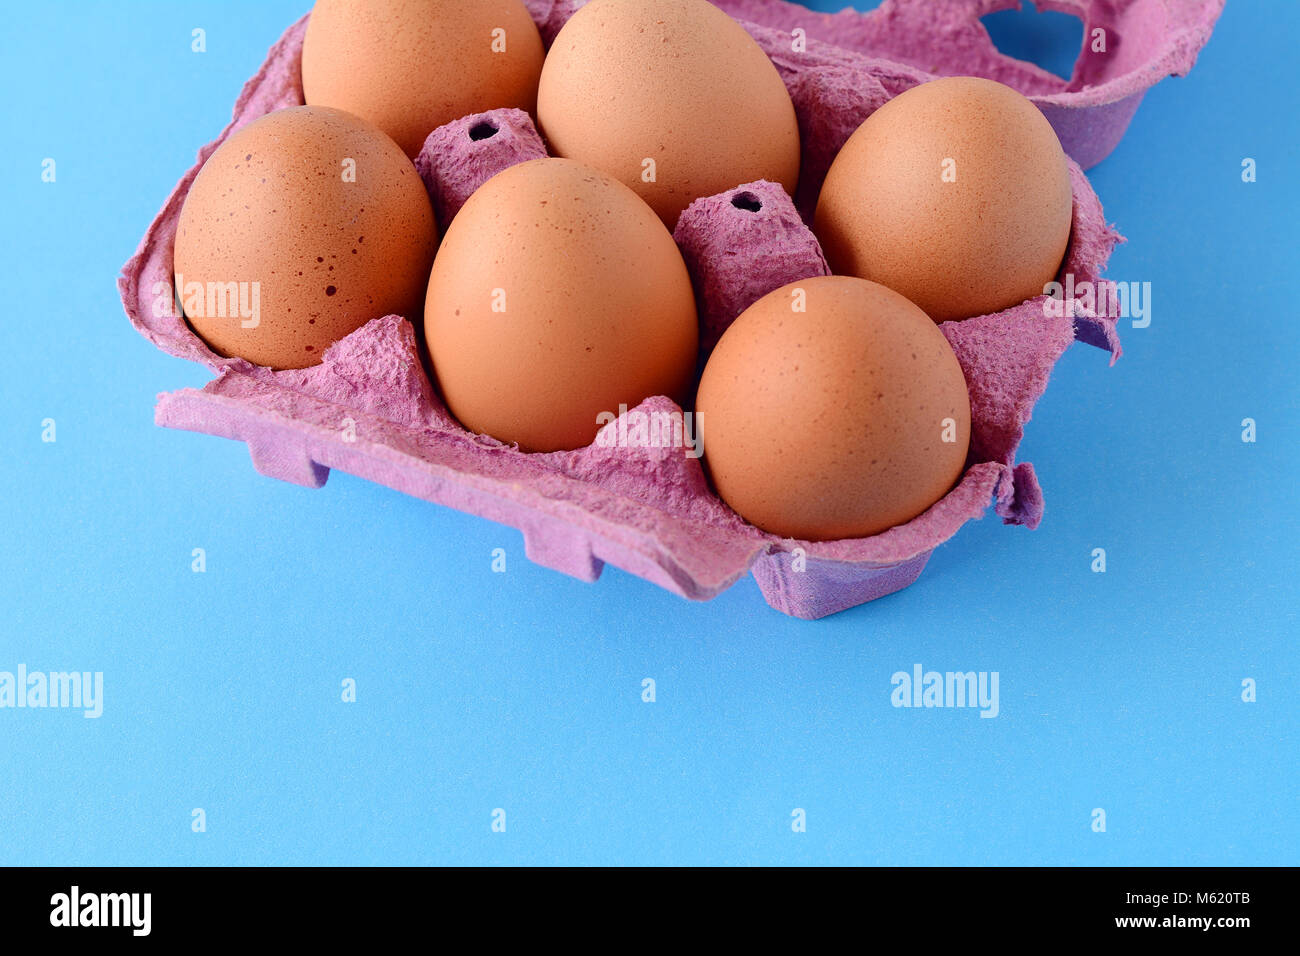 Top view of six brown eggs on box. Fresh food concept. Light blue background Stock Photo